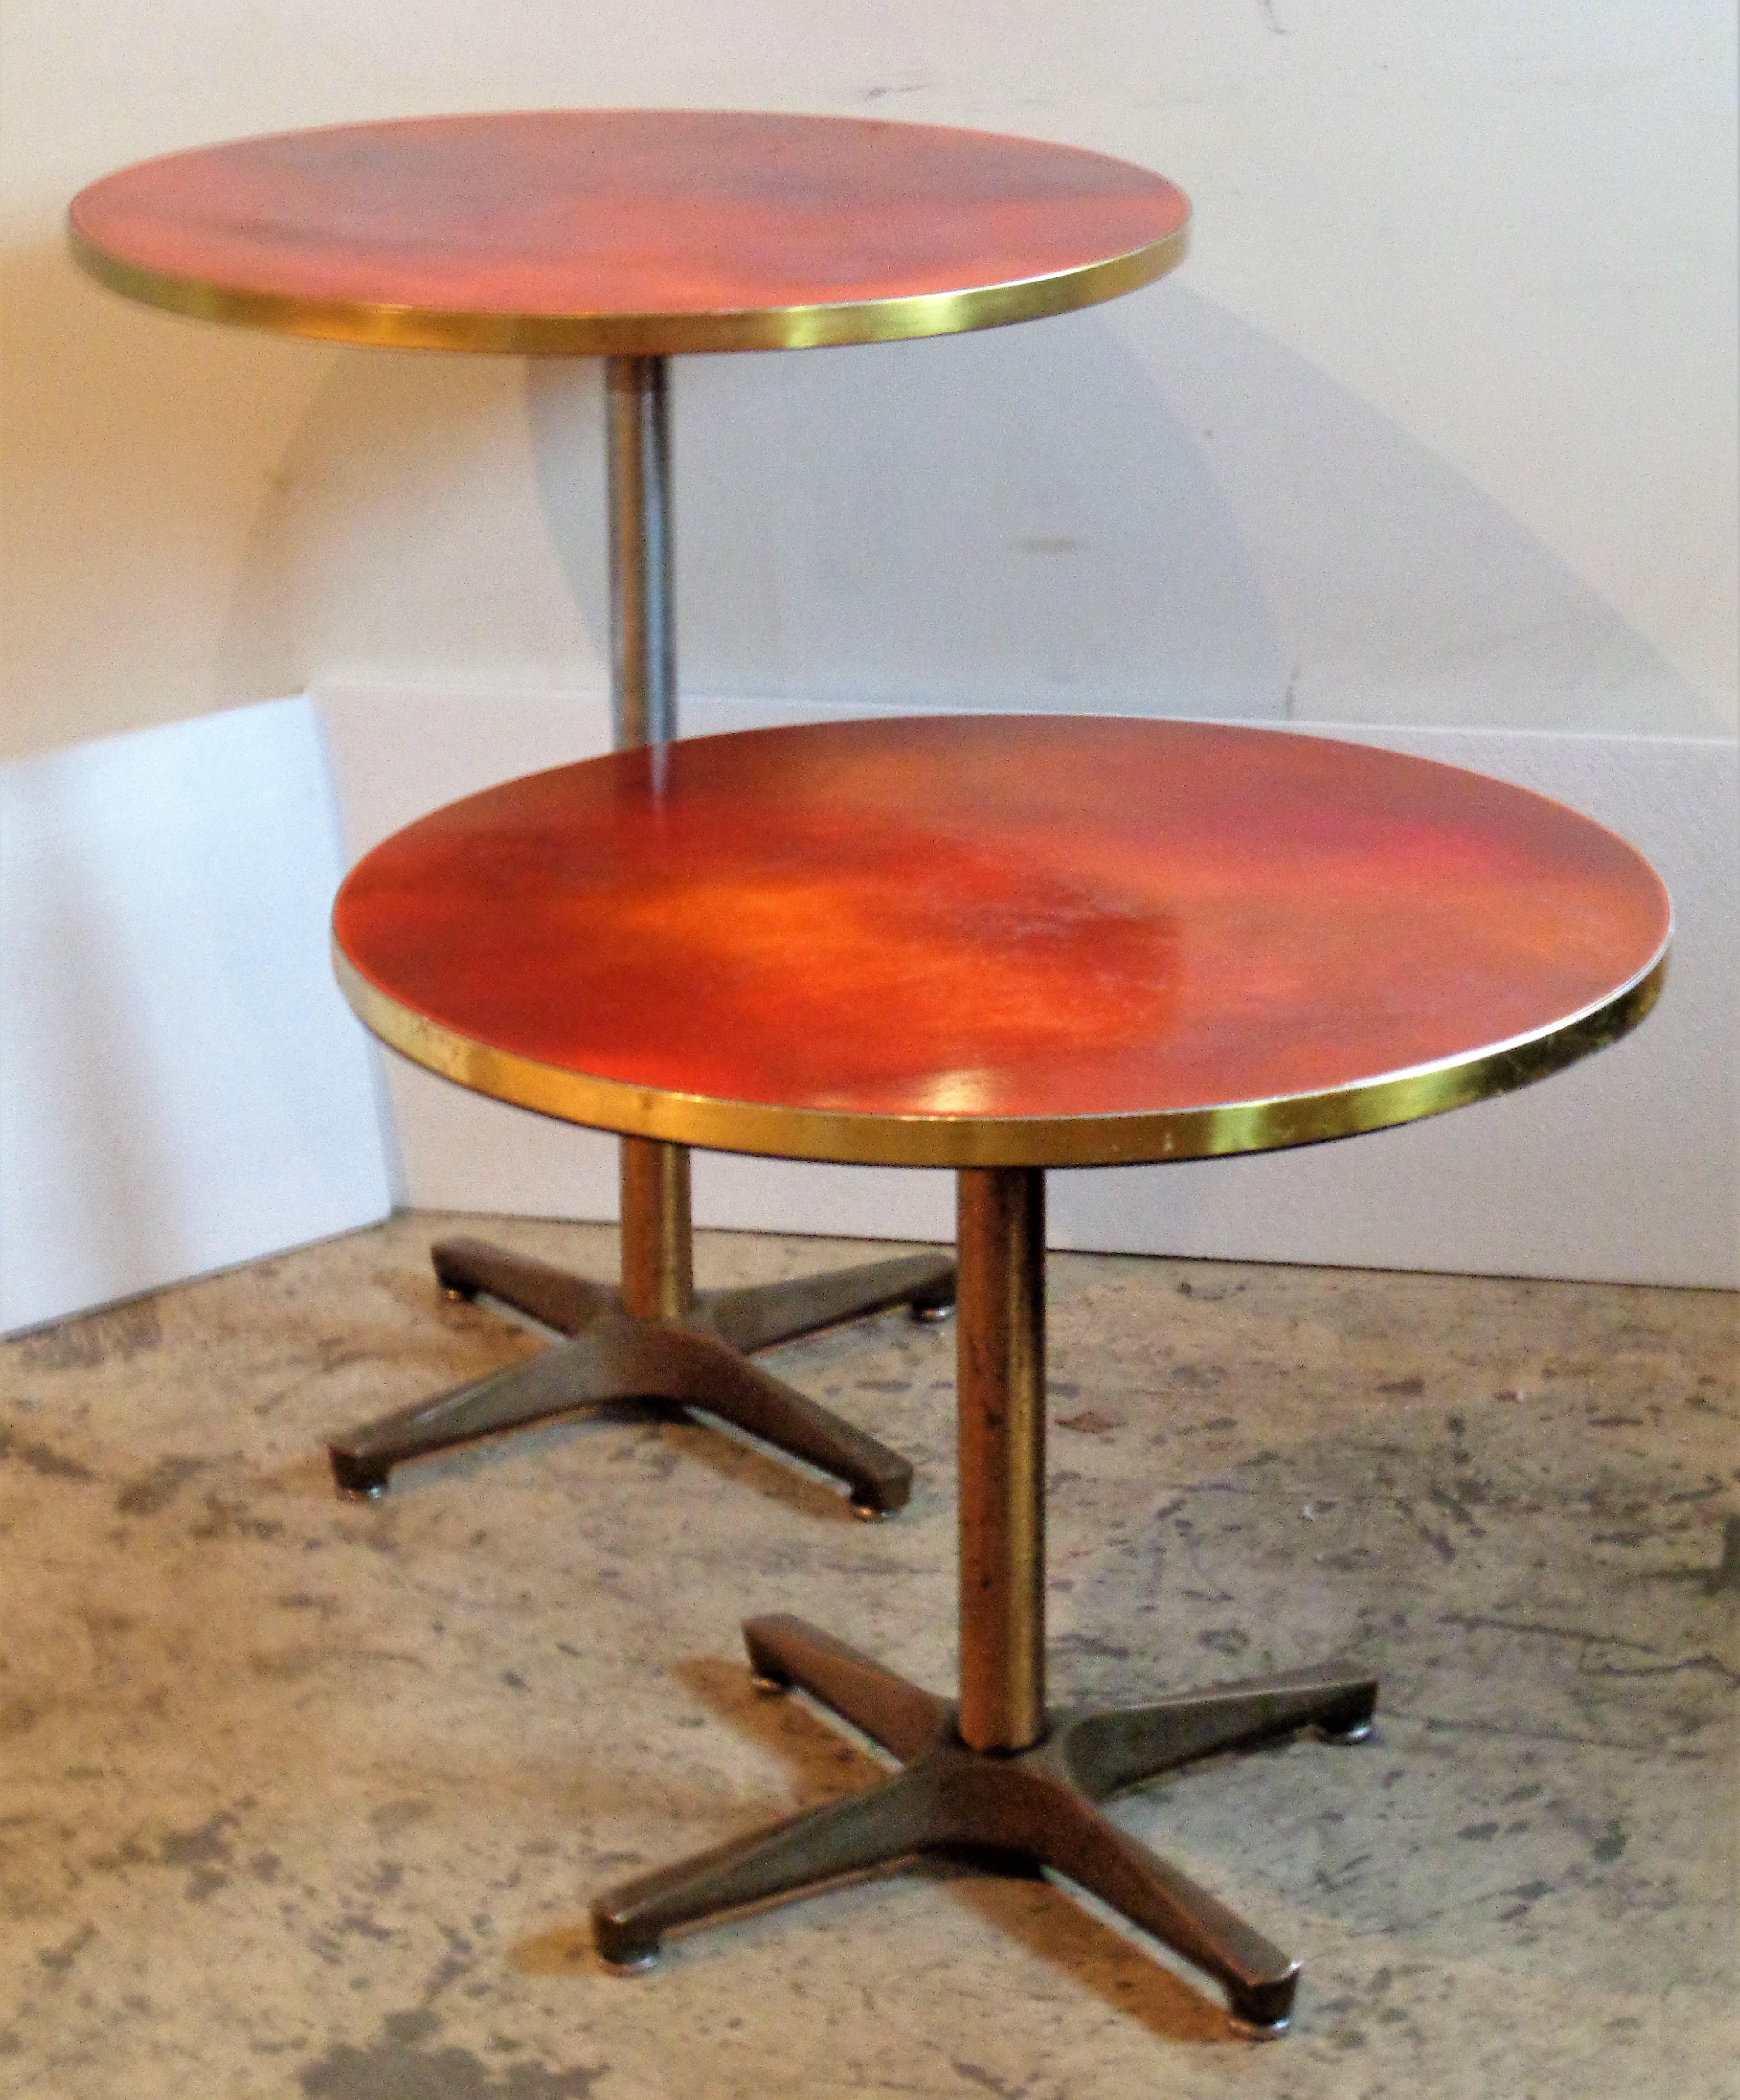 Bronze Base Enamel Top Adjustable Height Tables, 1940-1950 / ONE TABLE IS SOLD  8